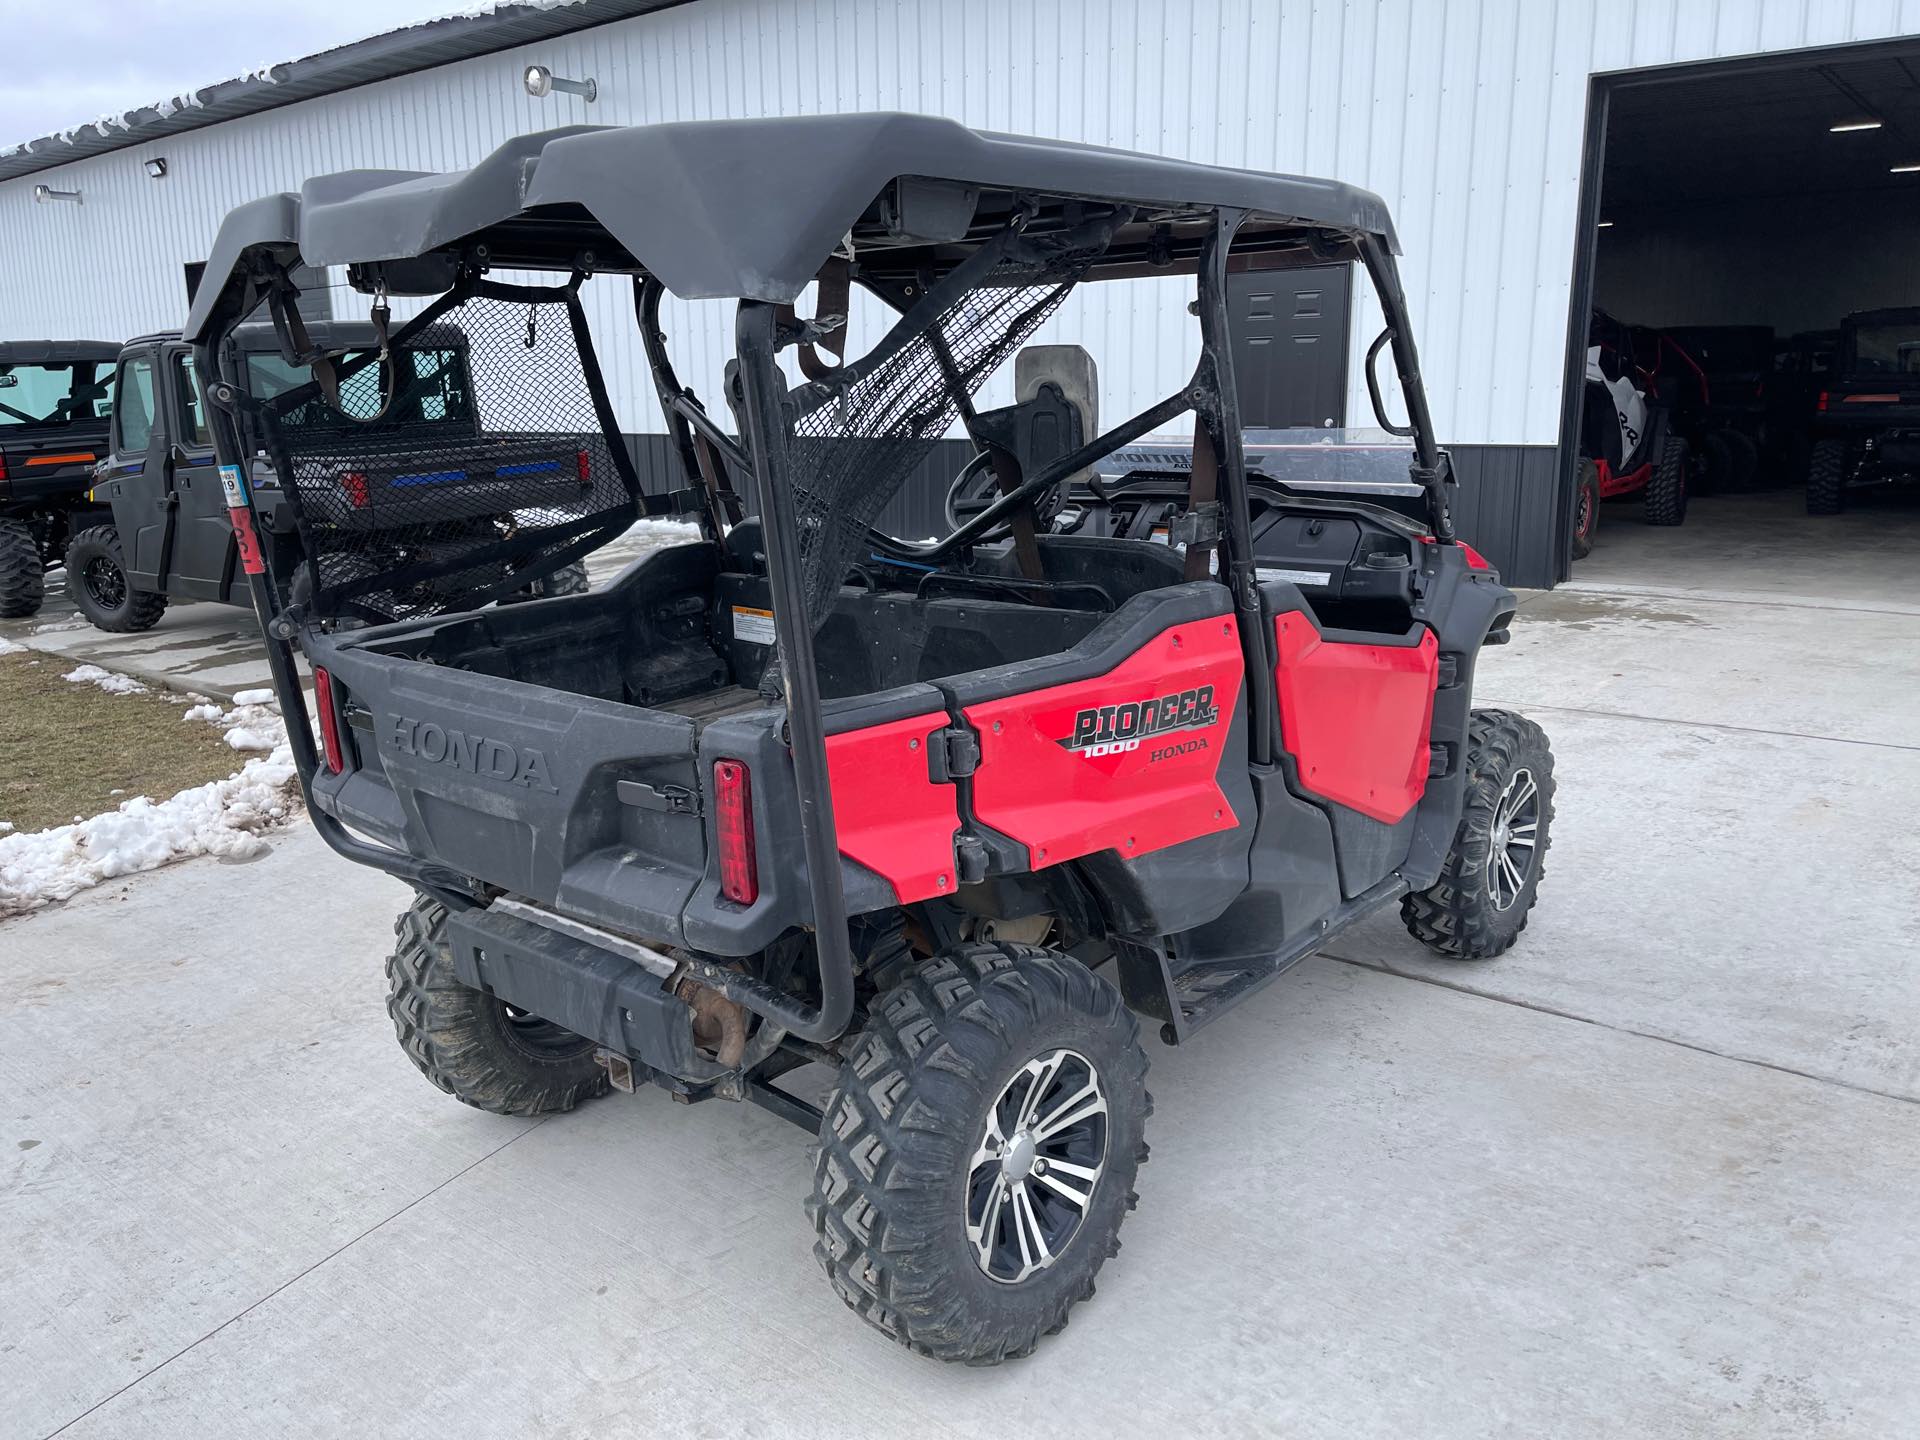 2016 Honda Pioneer 1000-5 Deluxe at Iron Hill Powersports